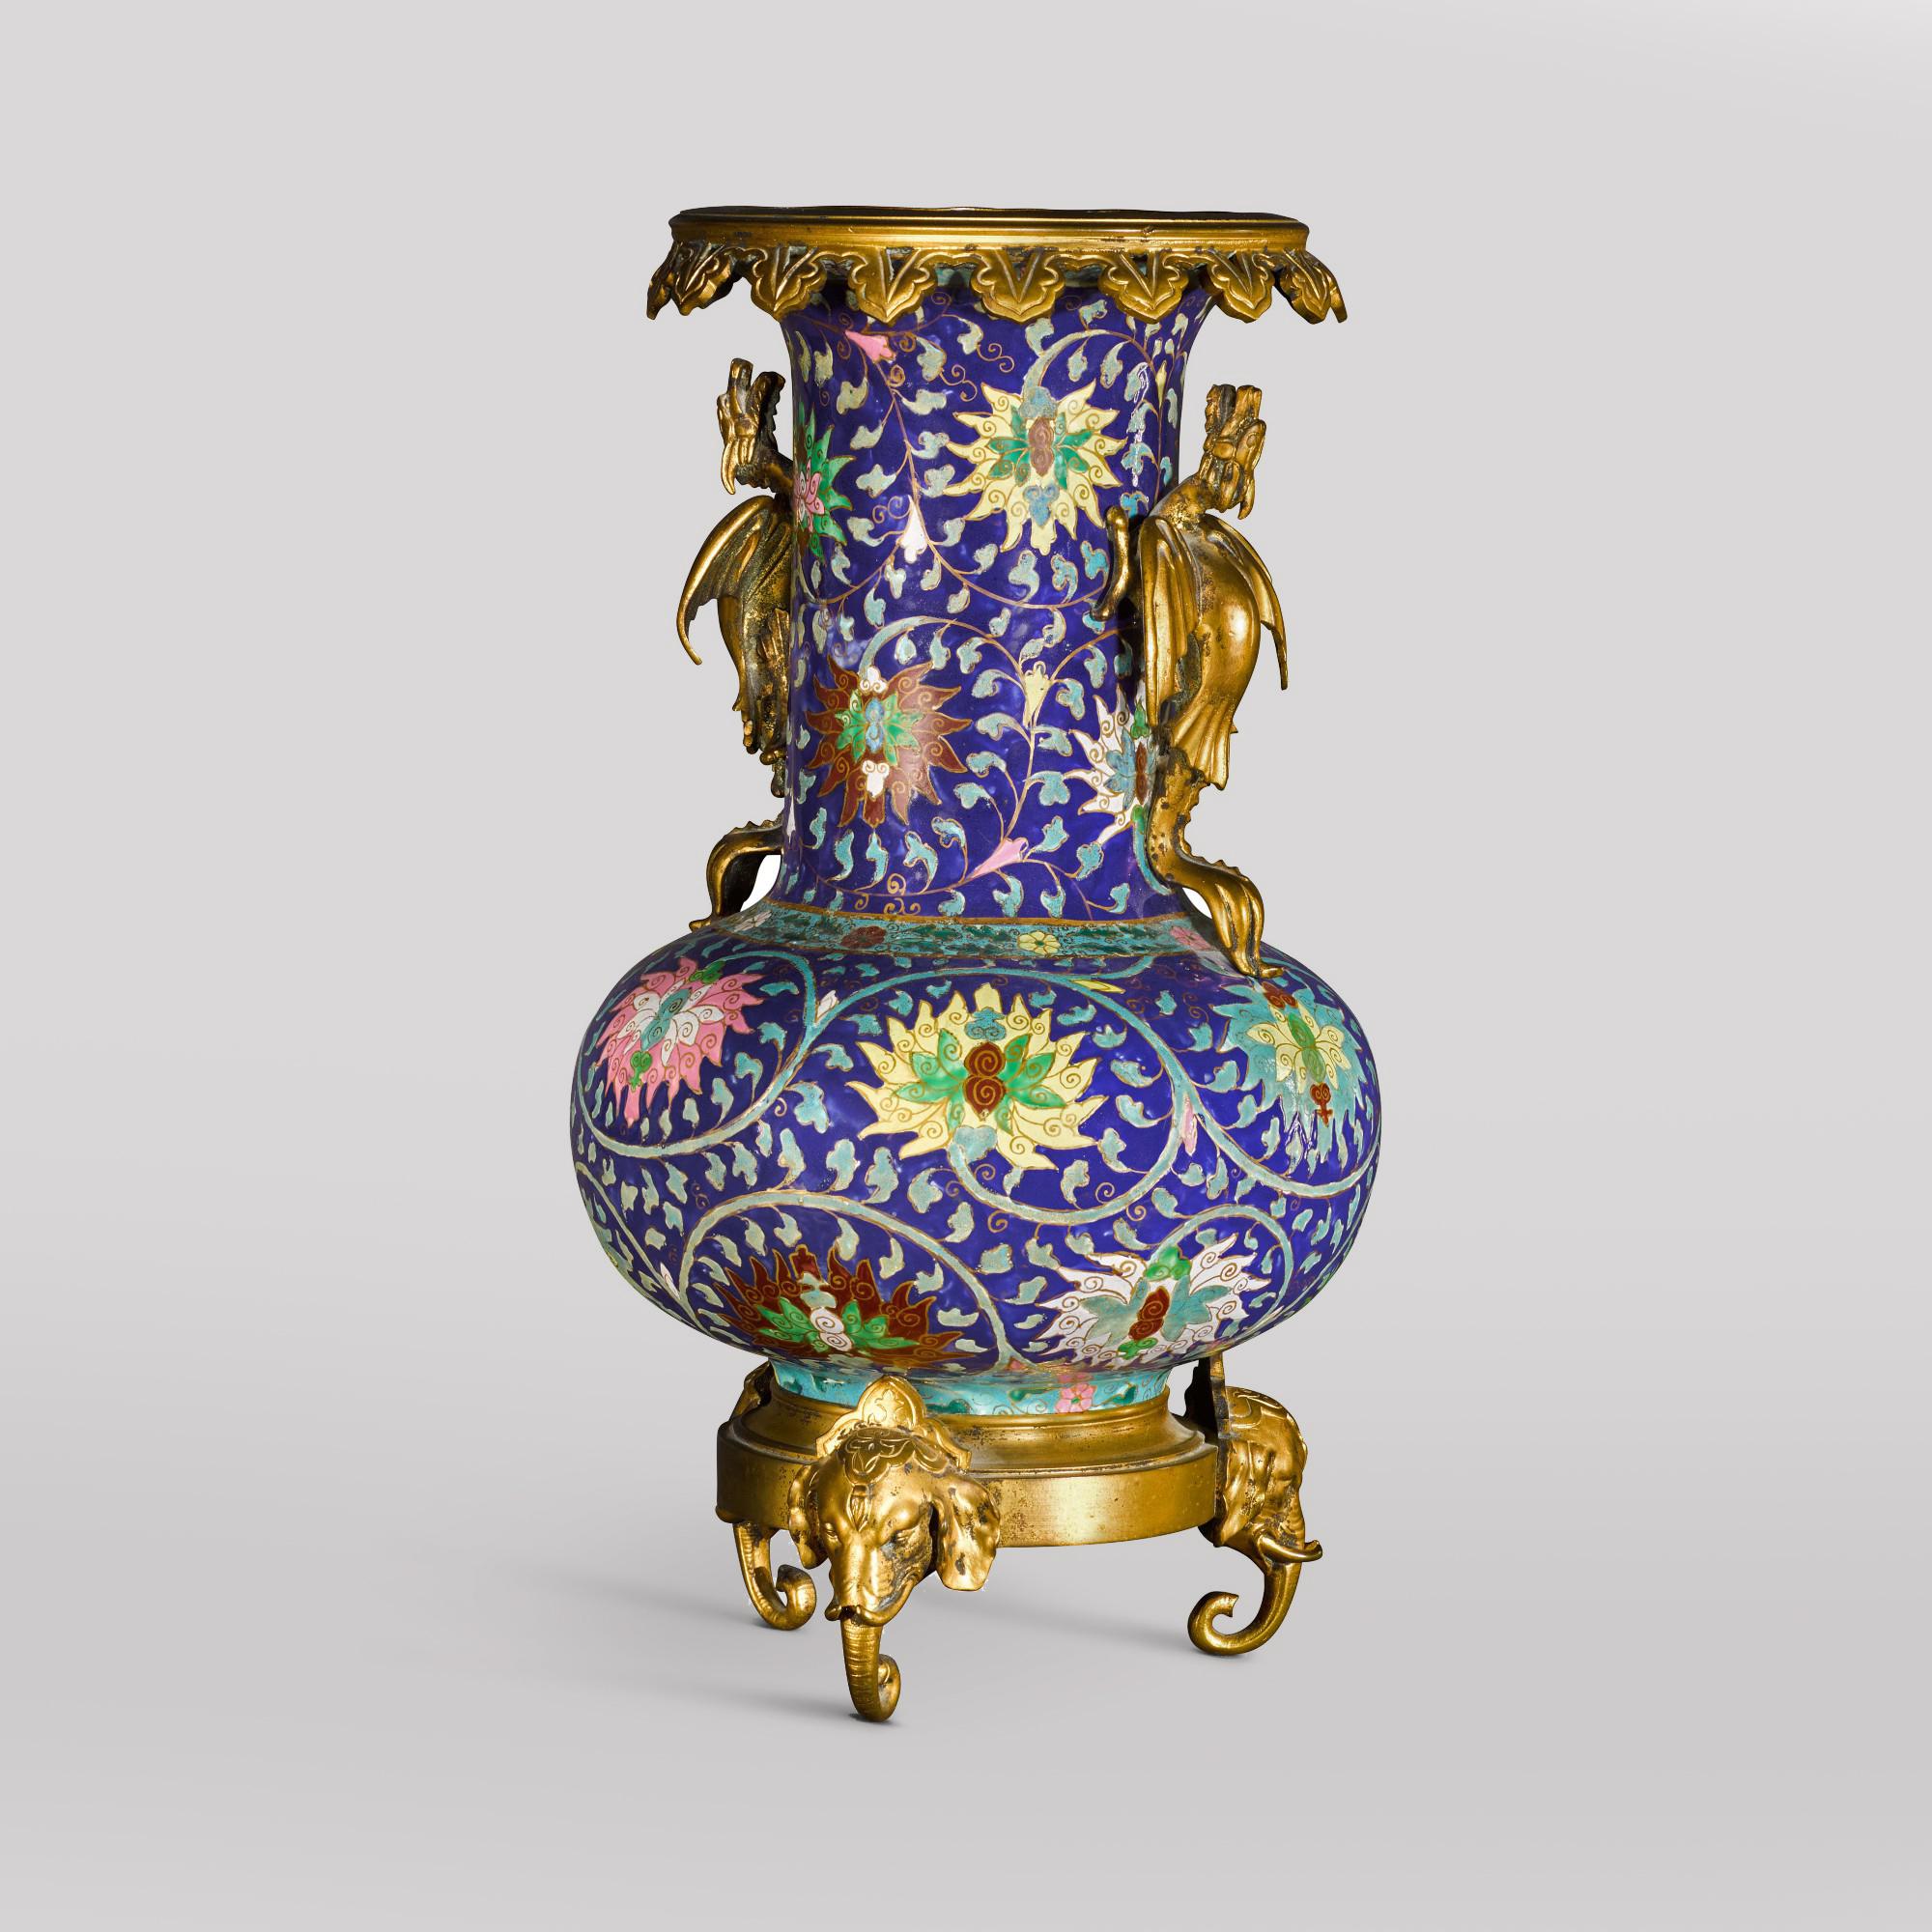 A Gilt-Bronze Mounted Chinese-Style Porcelain Vase With Dragon Handles and Elephant Head Feet, In the Manner of Ferdinand Barbedienne. 

French, circa 1860.